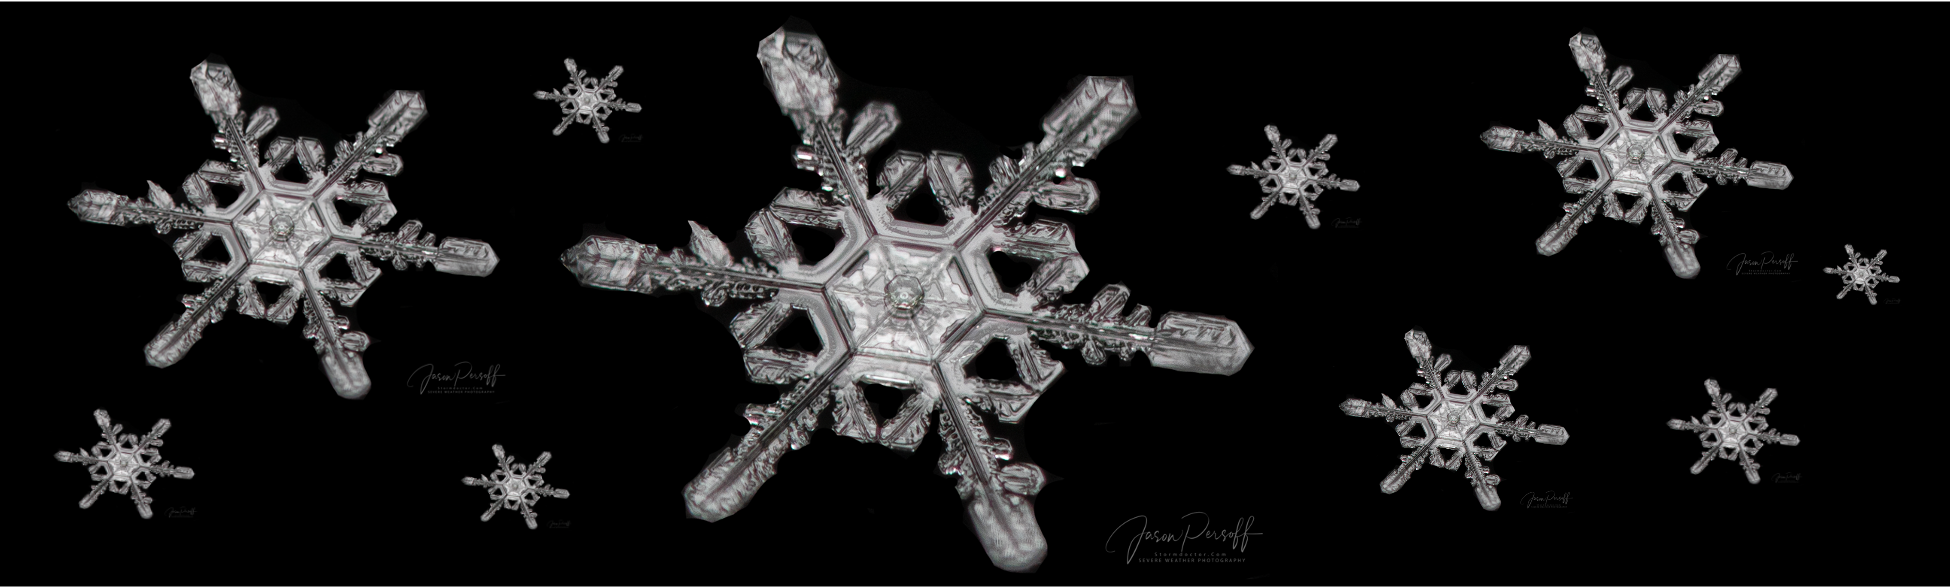 Close-up images of snowflakes on black background